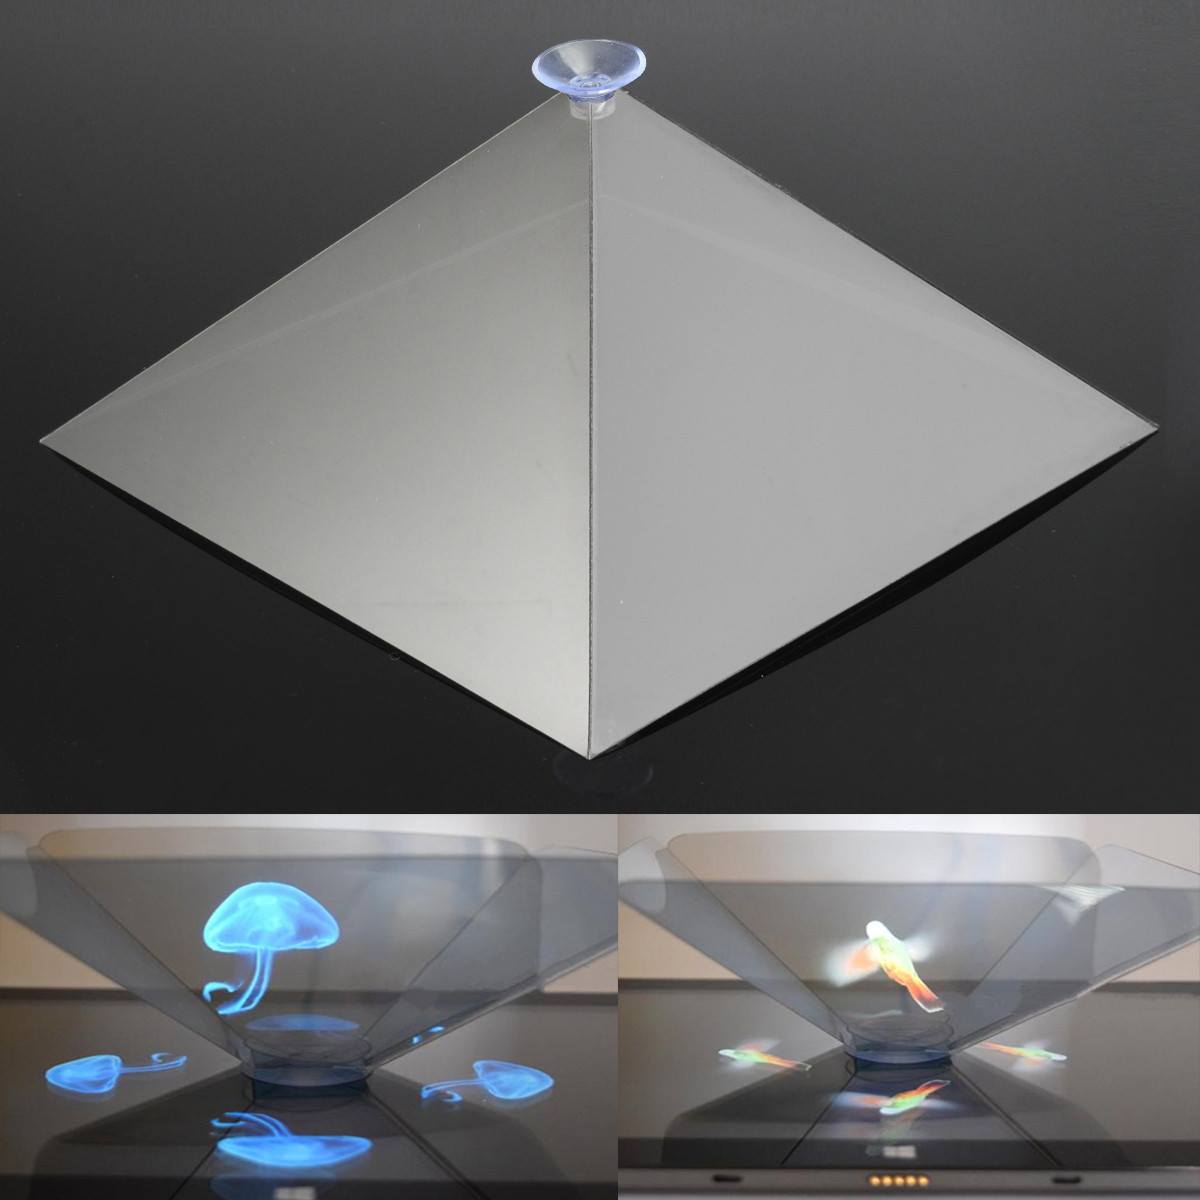 

3D Holographic Hologram Display Pyramid Stand Projector Creative Gifts For Tablet Phone